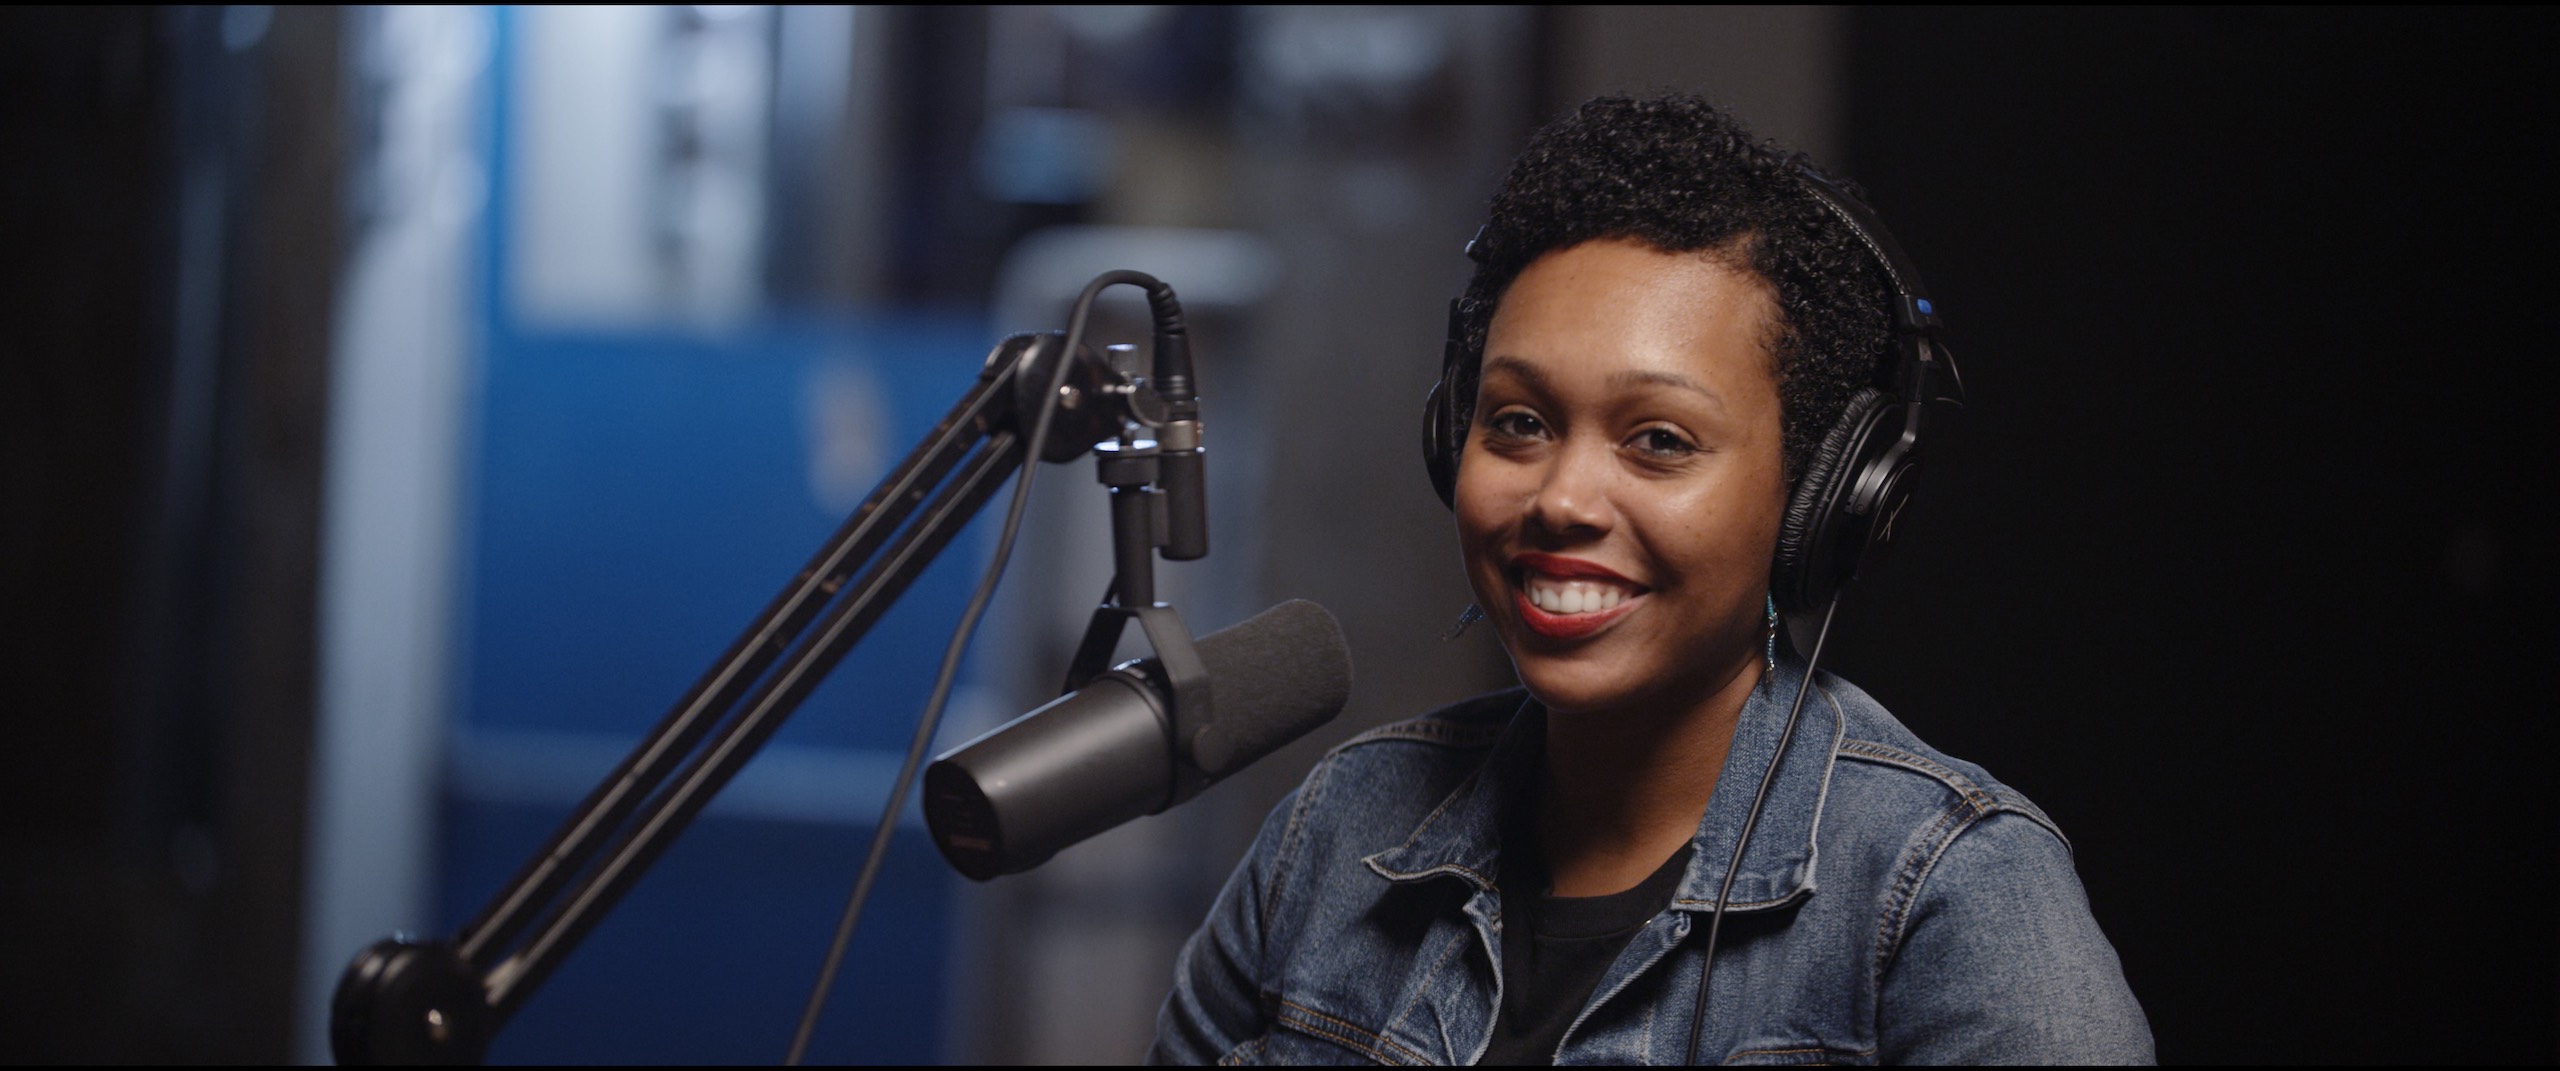 Season 2 of Uncreative Radio with Tiffany Lanier with her wearing headphones and smiling by a microphone posing for the camera